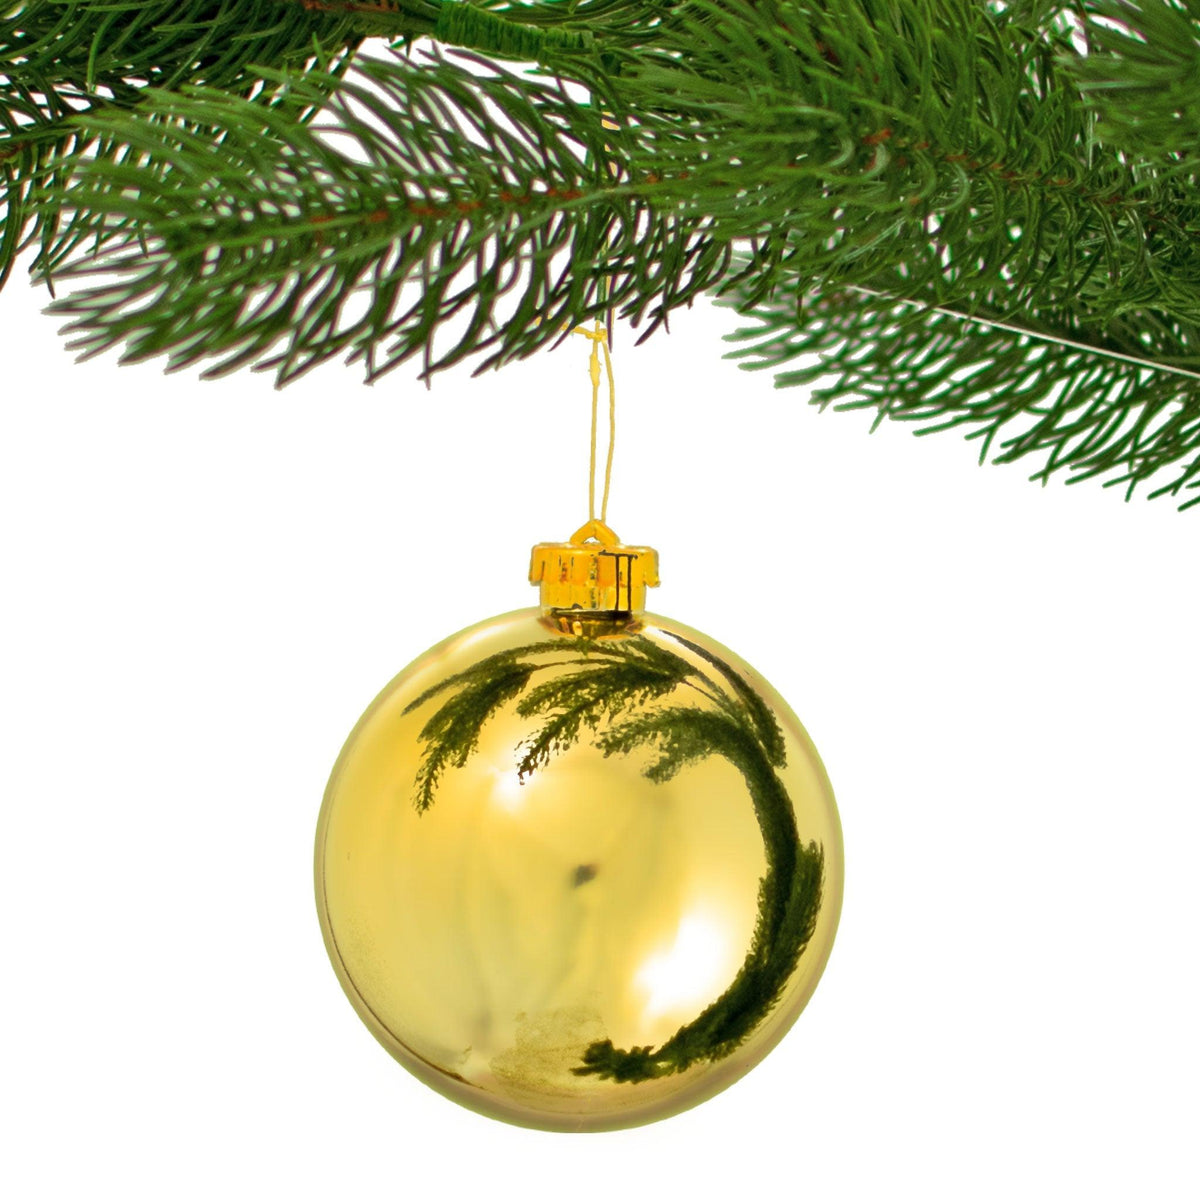 Shiny Gold Plastic Ball Ornaments & Christmas Tree Decorations sold by Lee Display. Available now at leedisplay.com